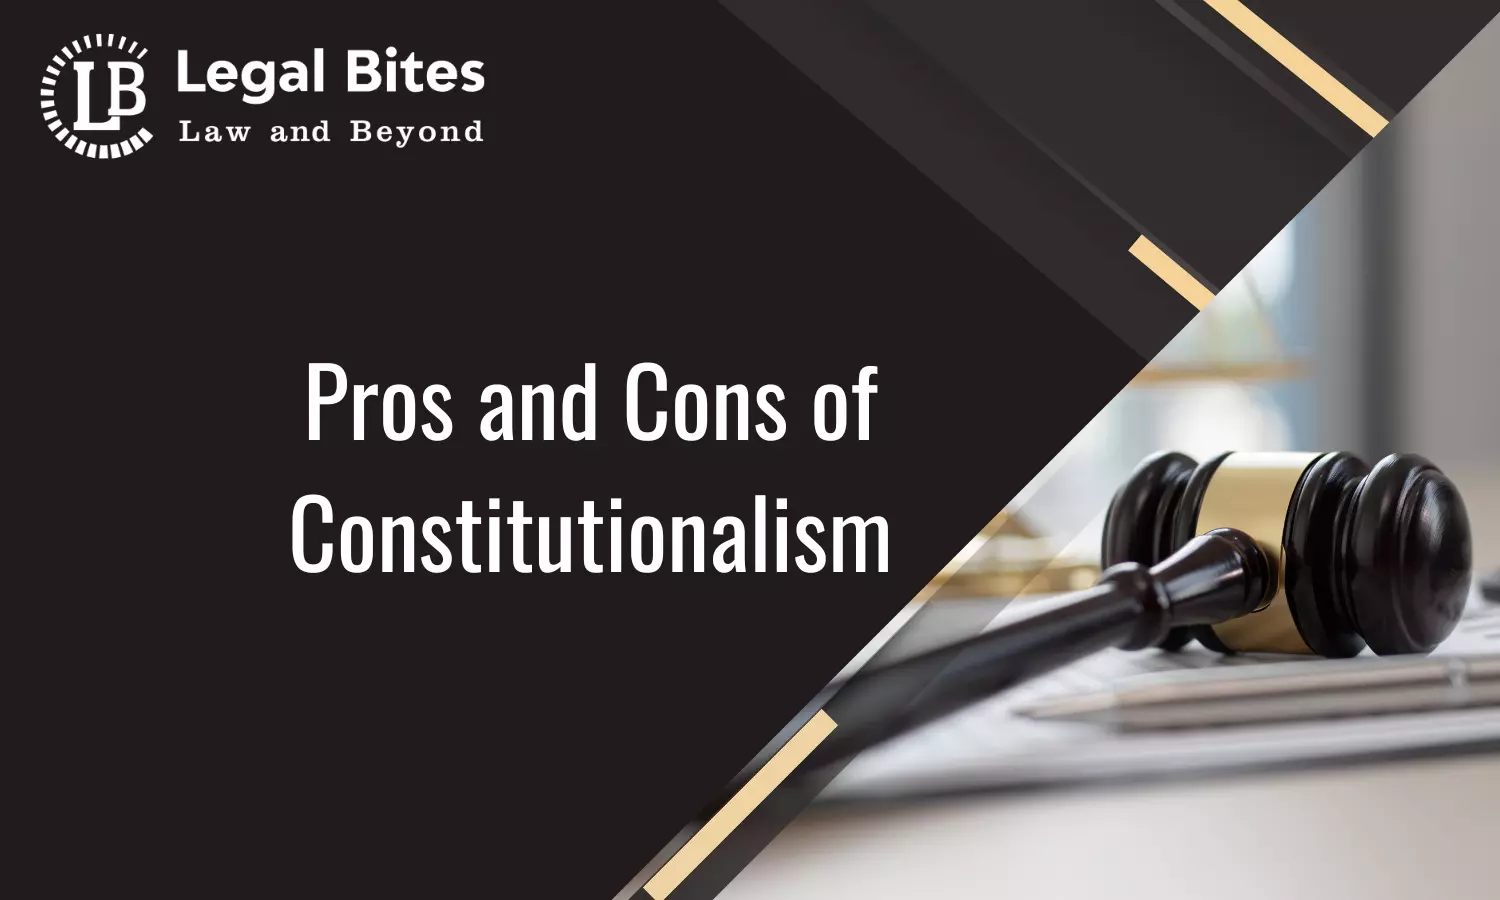 Pros and Cons of Constitutionalism